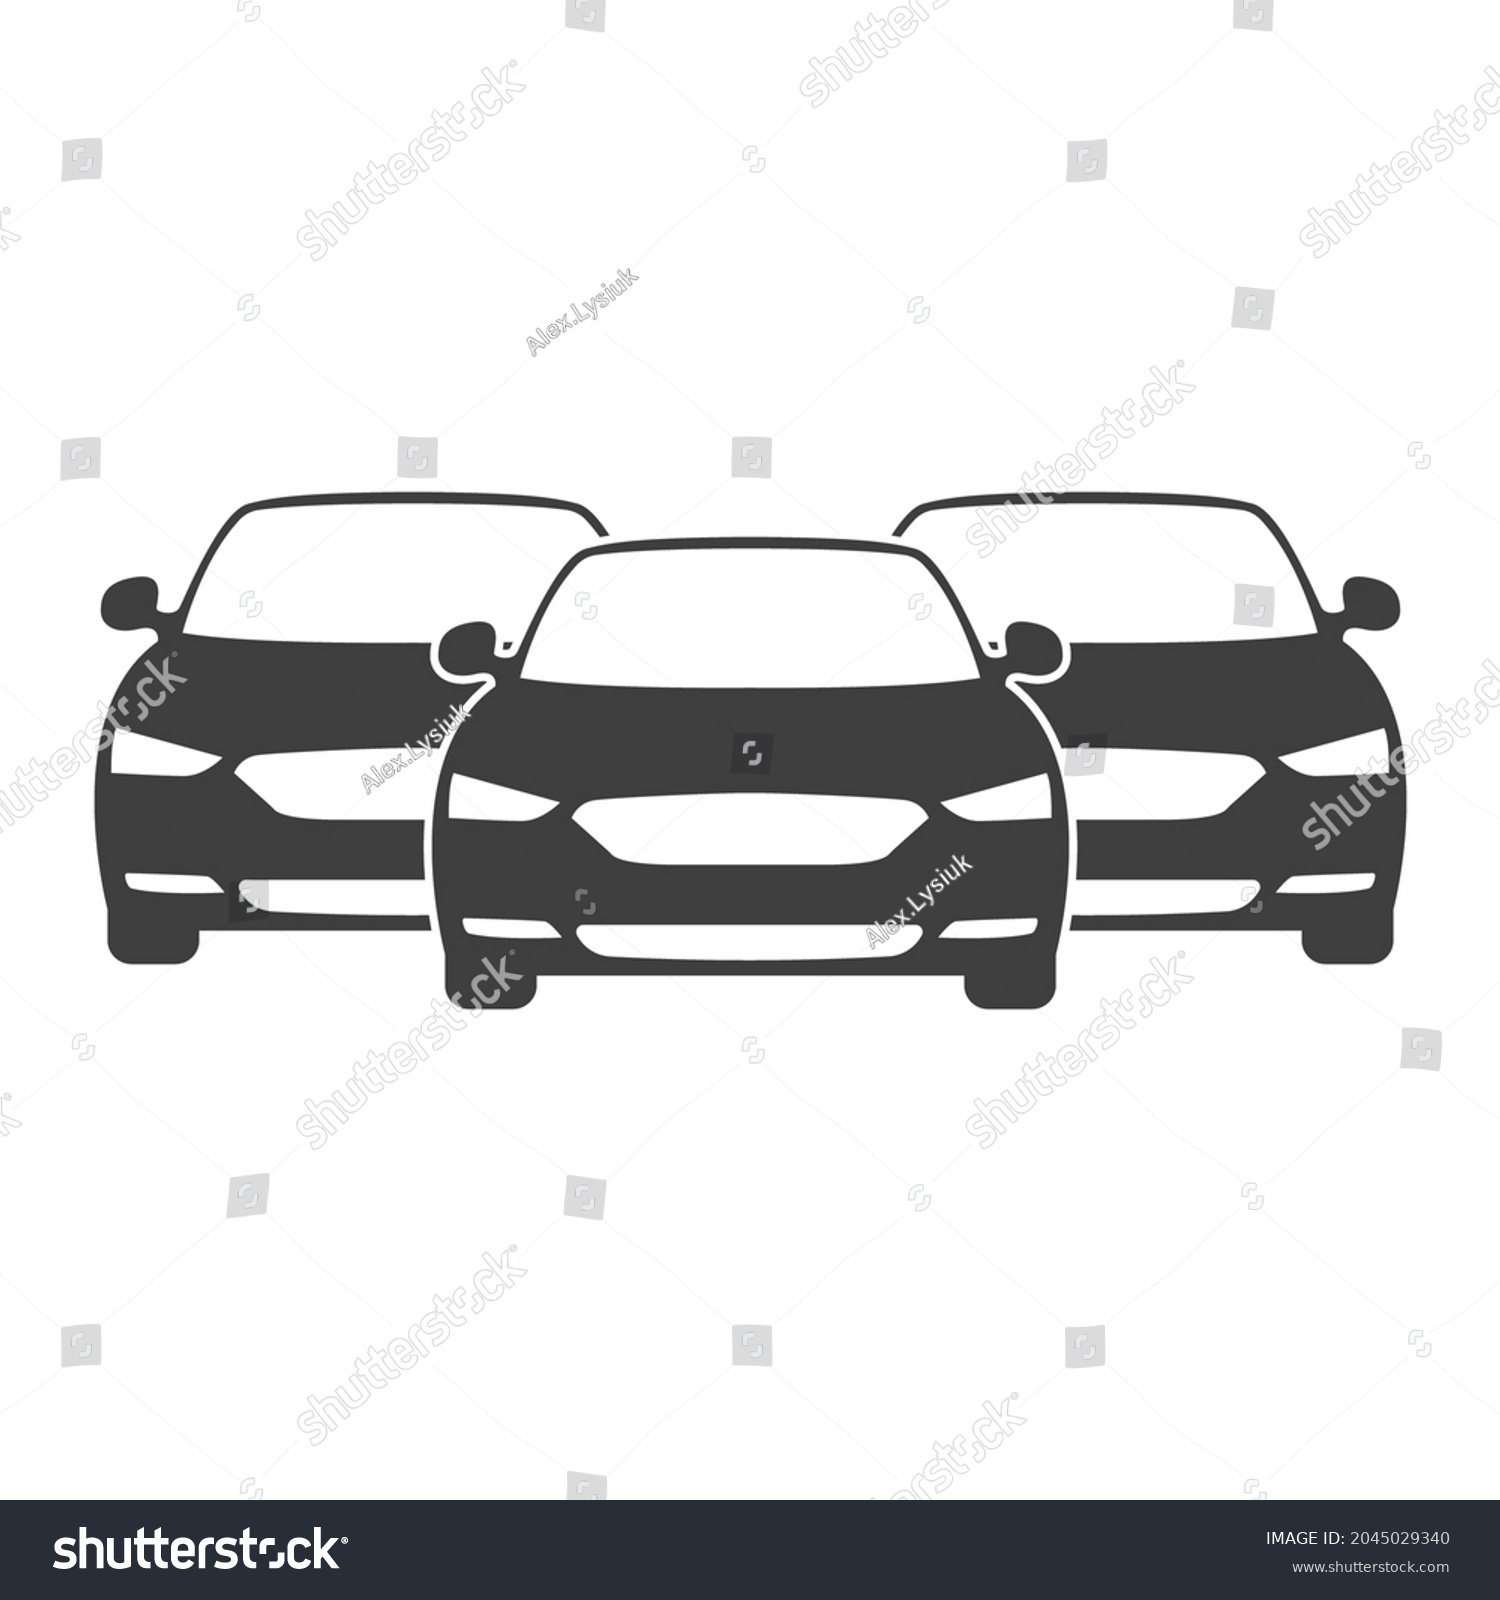 Car fleet icon. Front image of a group of cars. Clipart image isolated on white background. Vector illustration. #2045029340